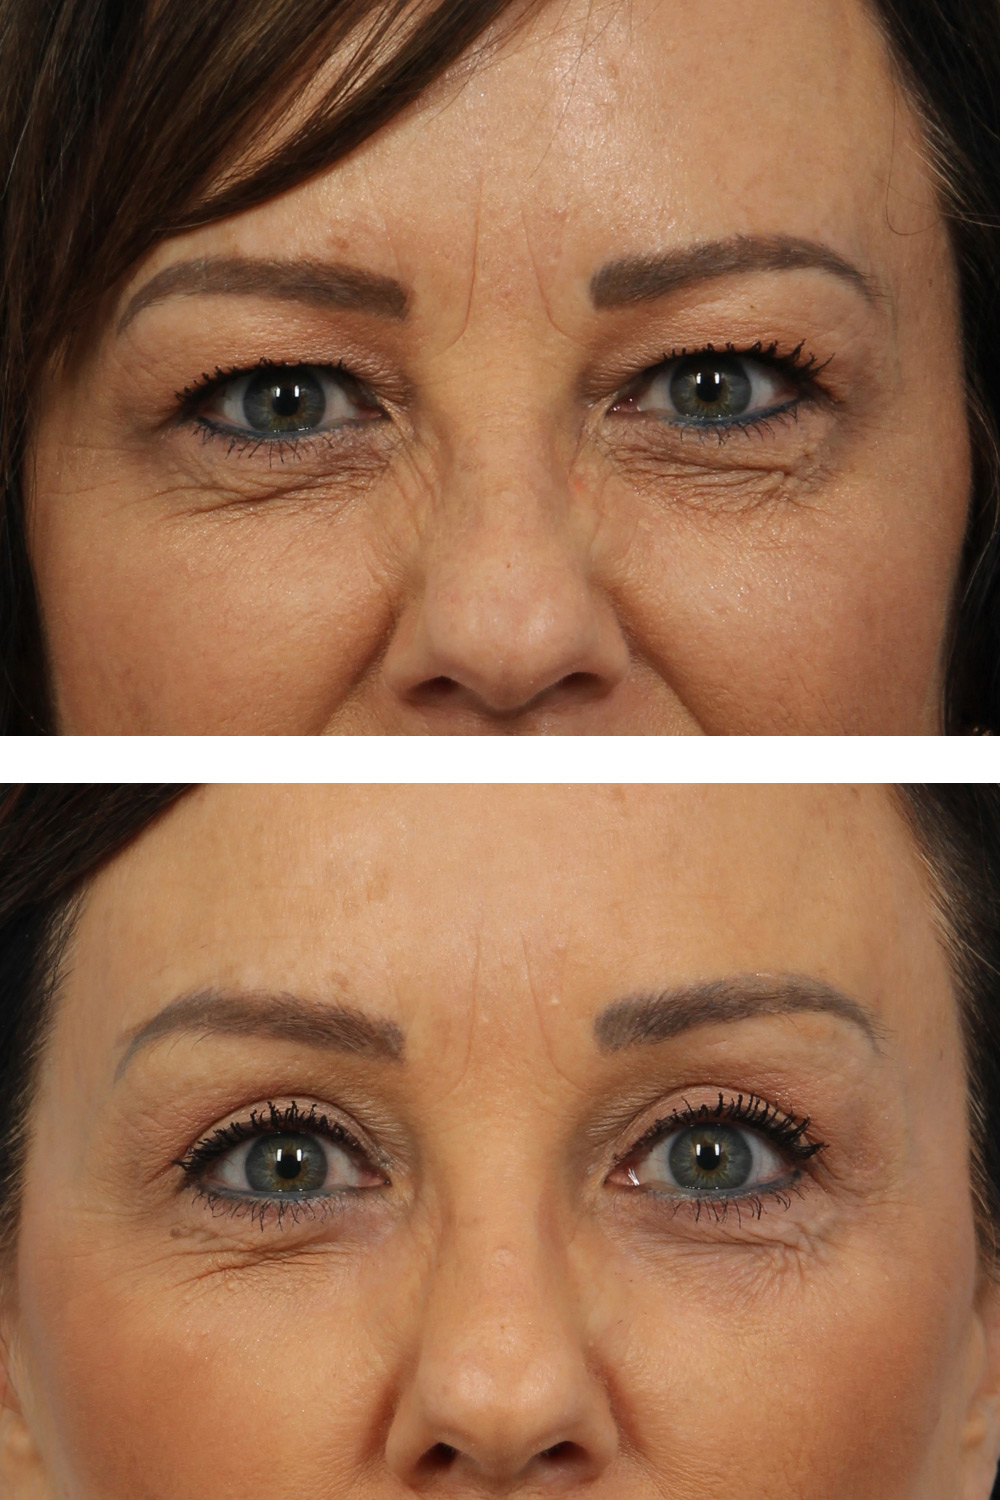 Blepharoplasty (eyelid surgery) on a 50-year-old woman